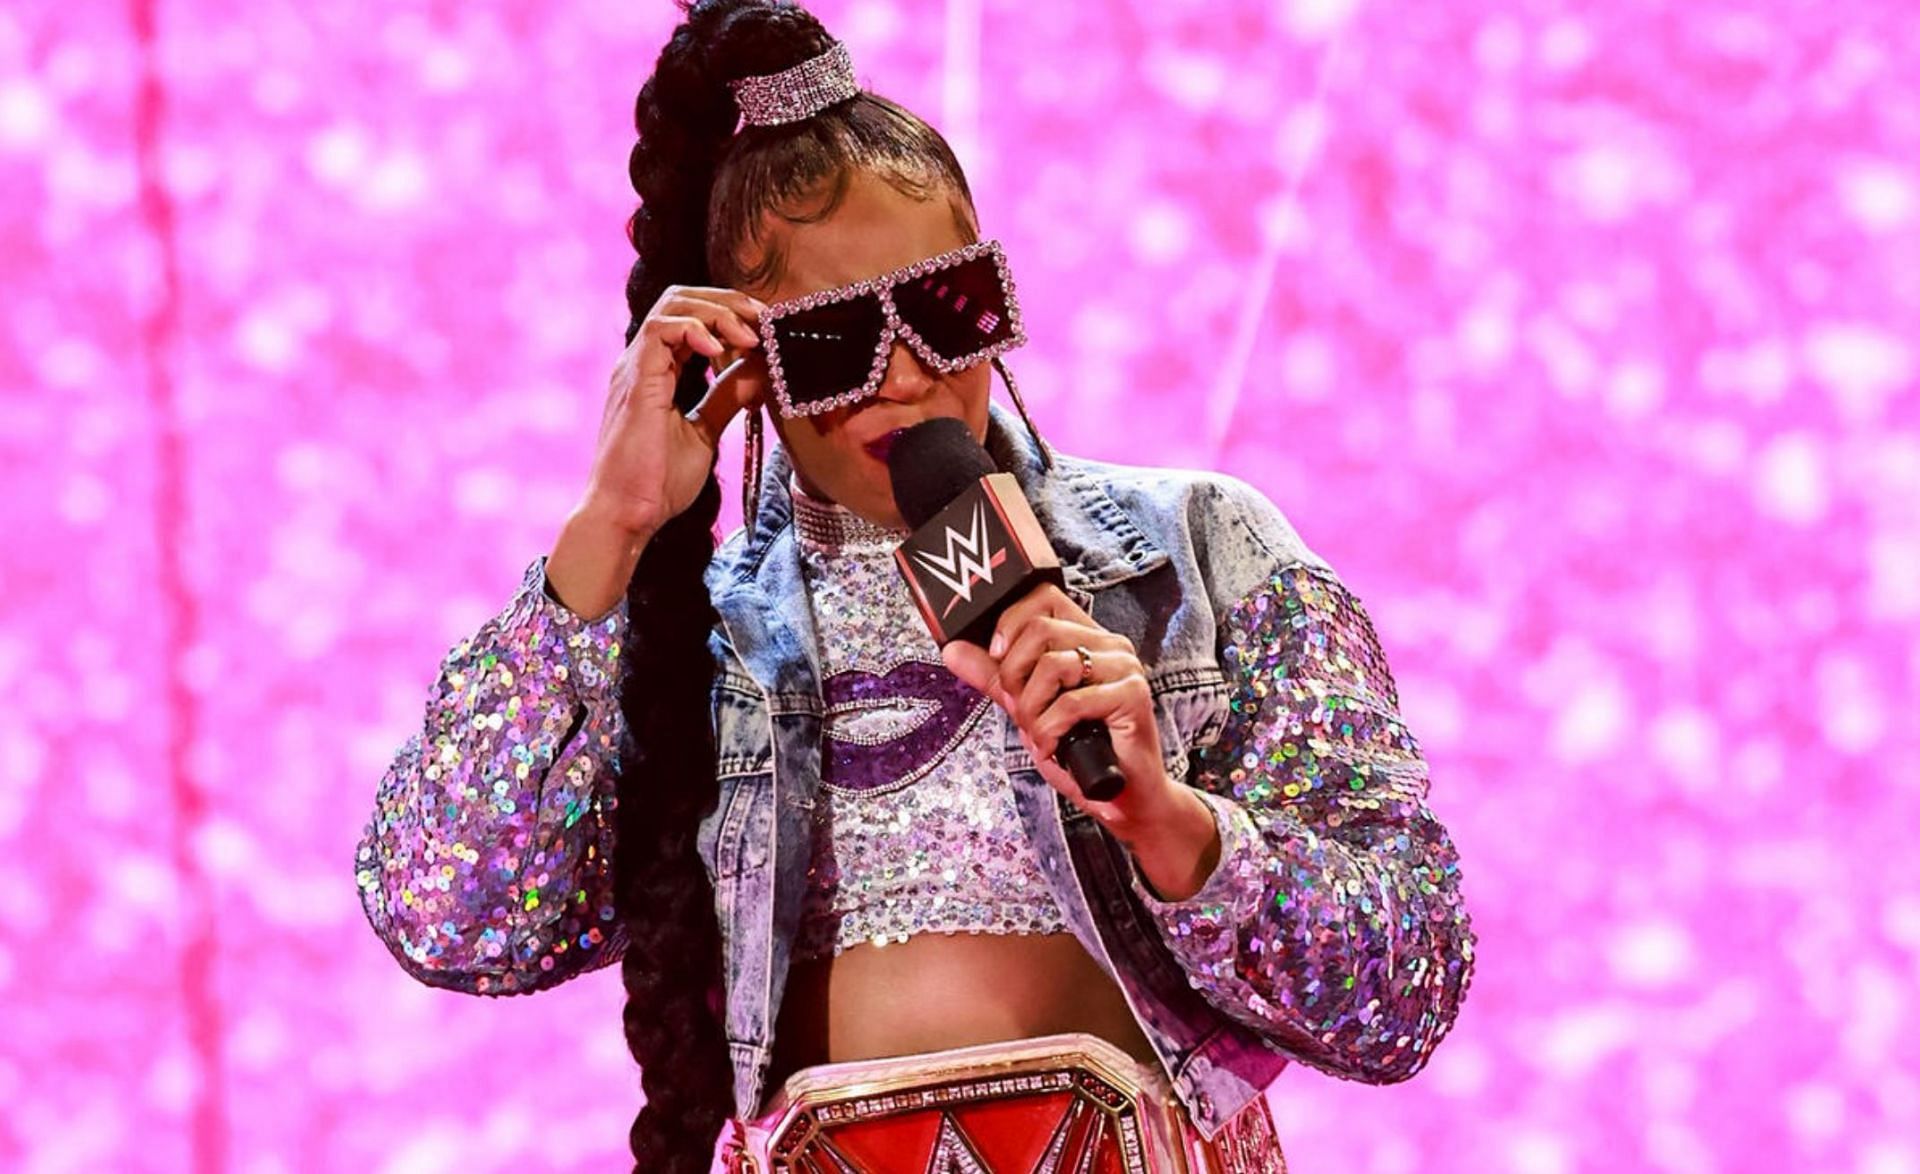 Bianca Belair confronted Becky Lynch this week on RAW